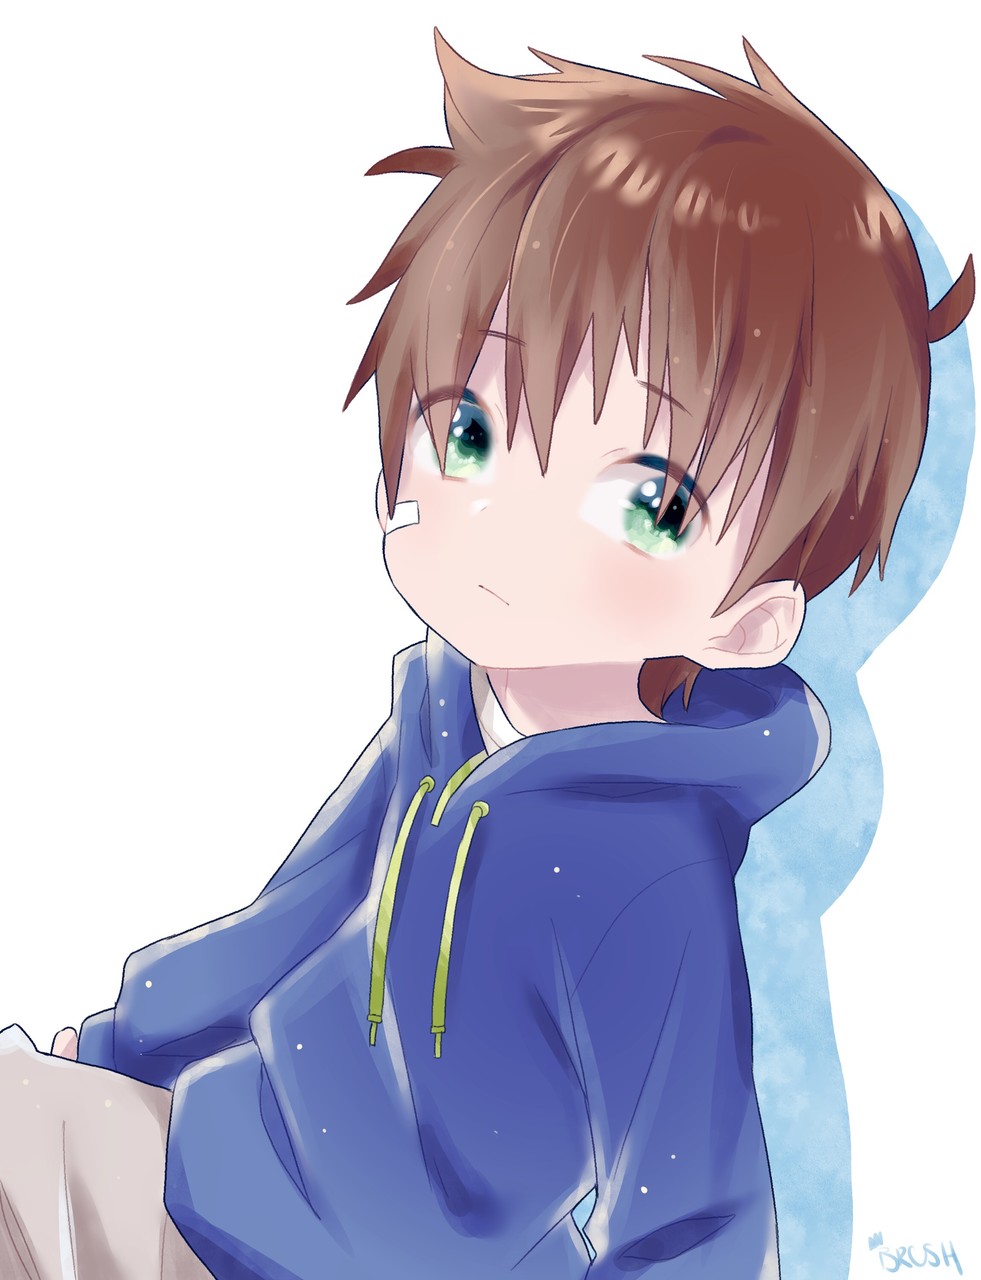 Attached: 2 images I haven’t died, I promise :3 #shota #ショタ https://pawoo.n...